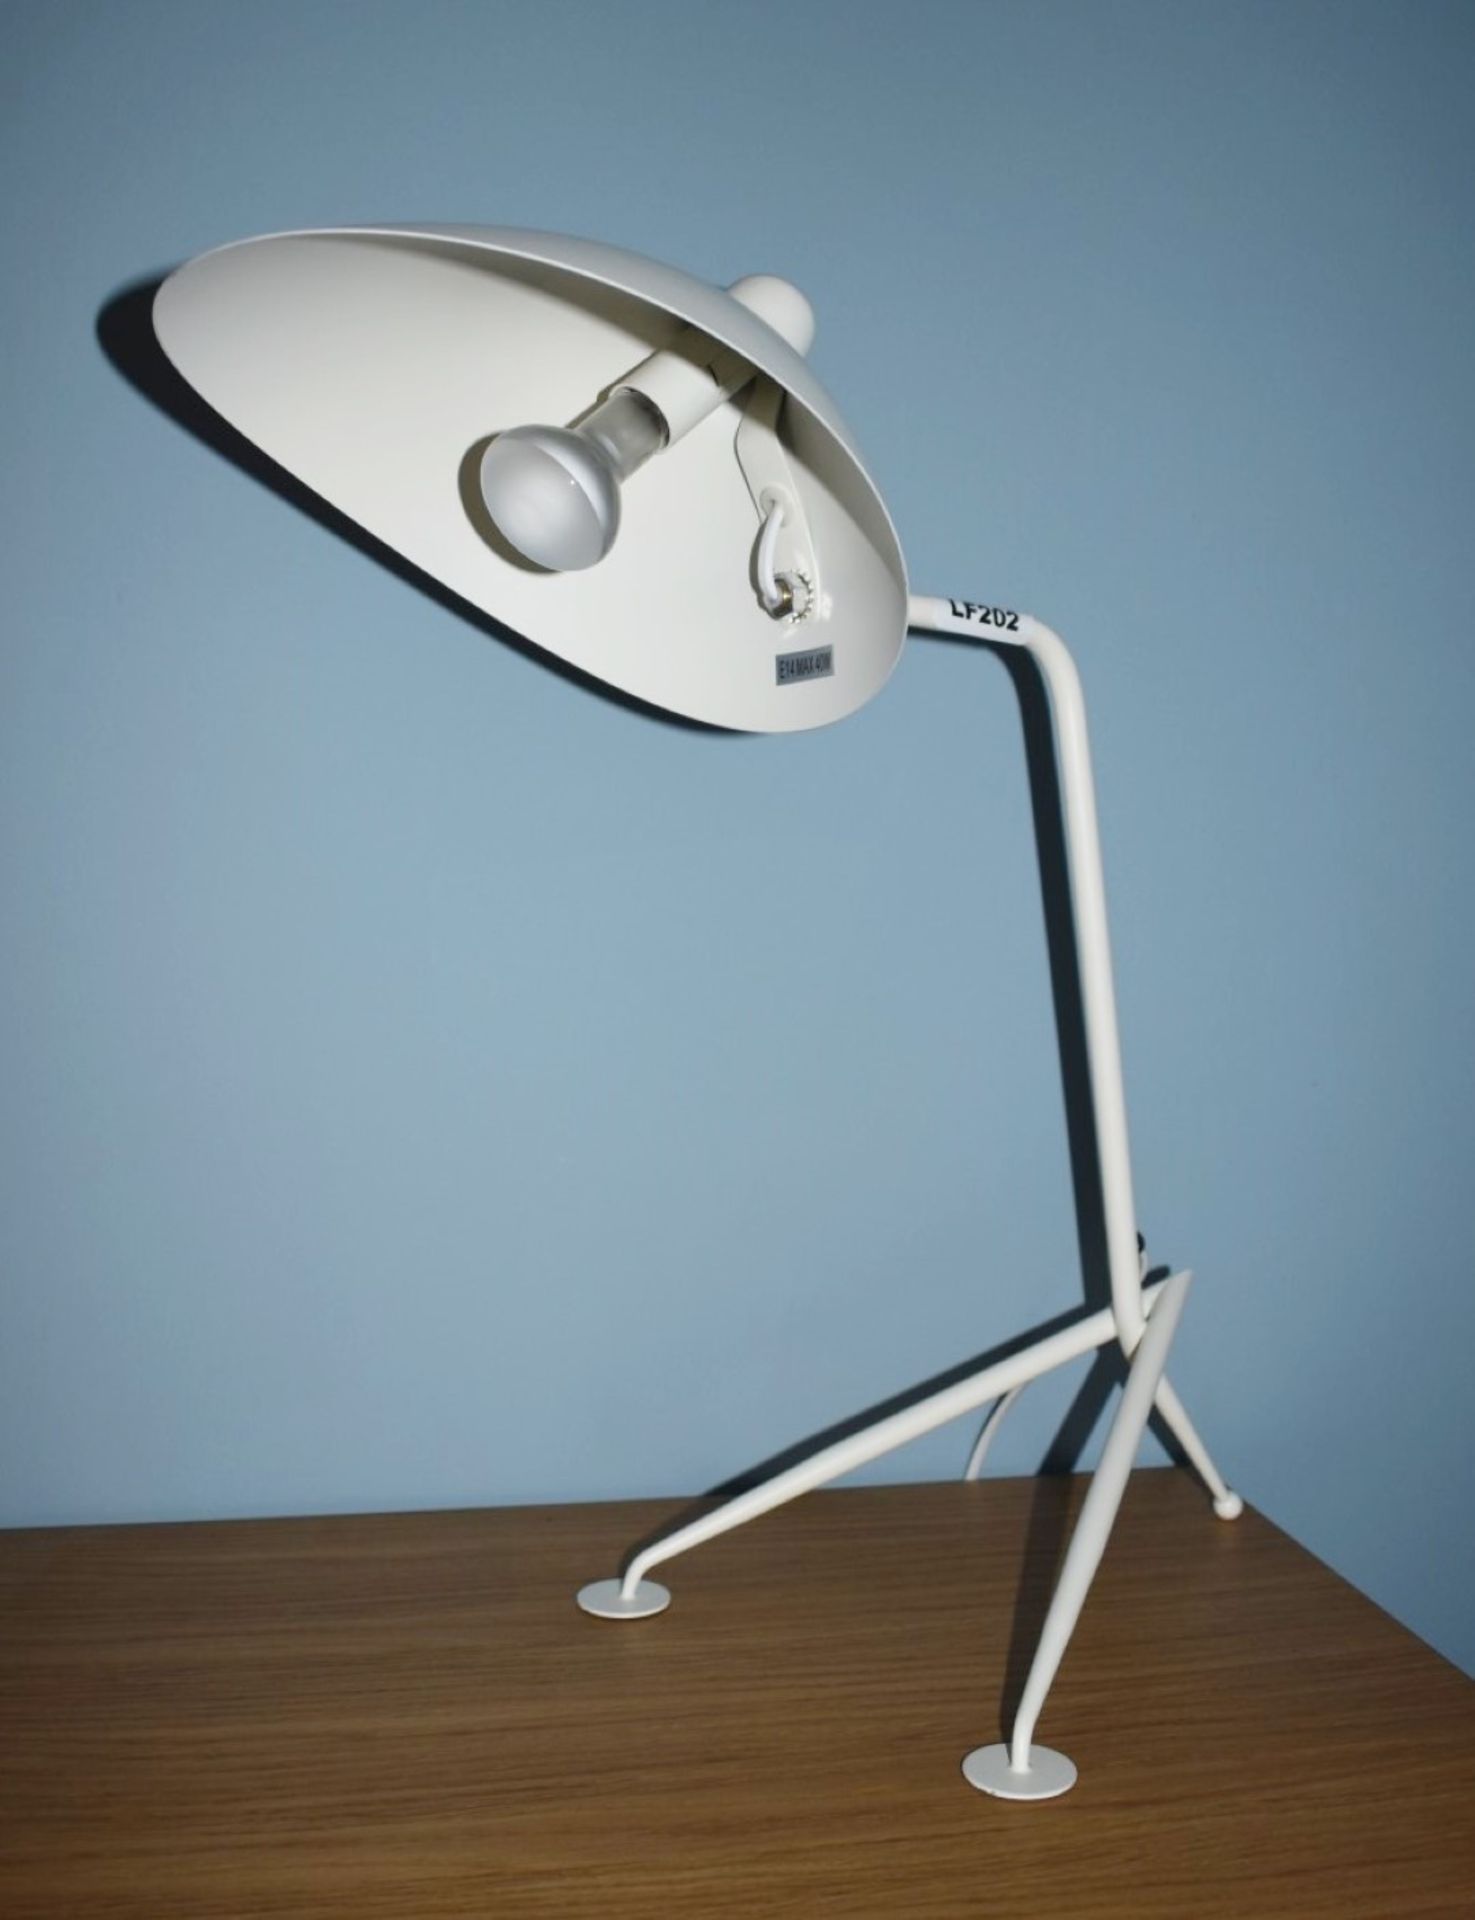 1 x Desk Lamp in White With Inline On/Off Switch and 1950's Inspired Design - Height 48 cms